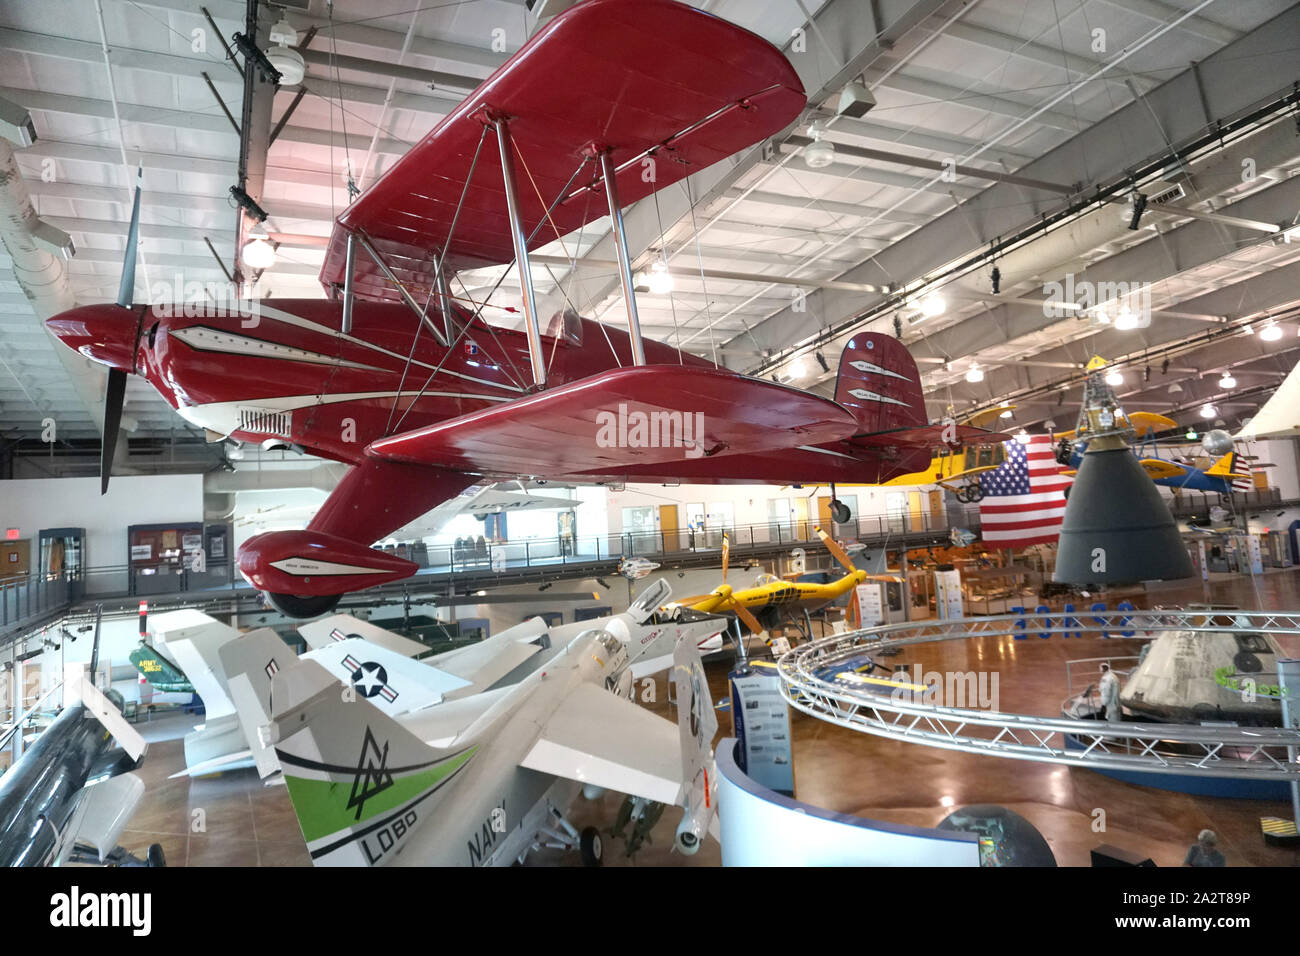 The main floor of  the  Frontiers of Flight Museum at Love Field in Dallas, Texas  Photo by Dennis Brack Stock Photo